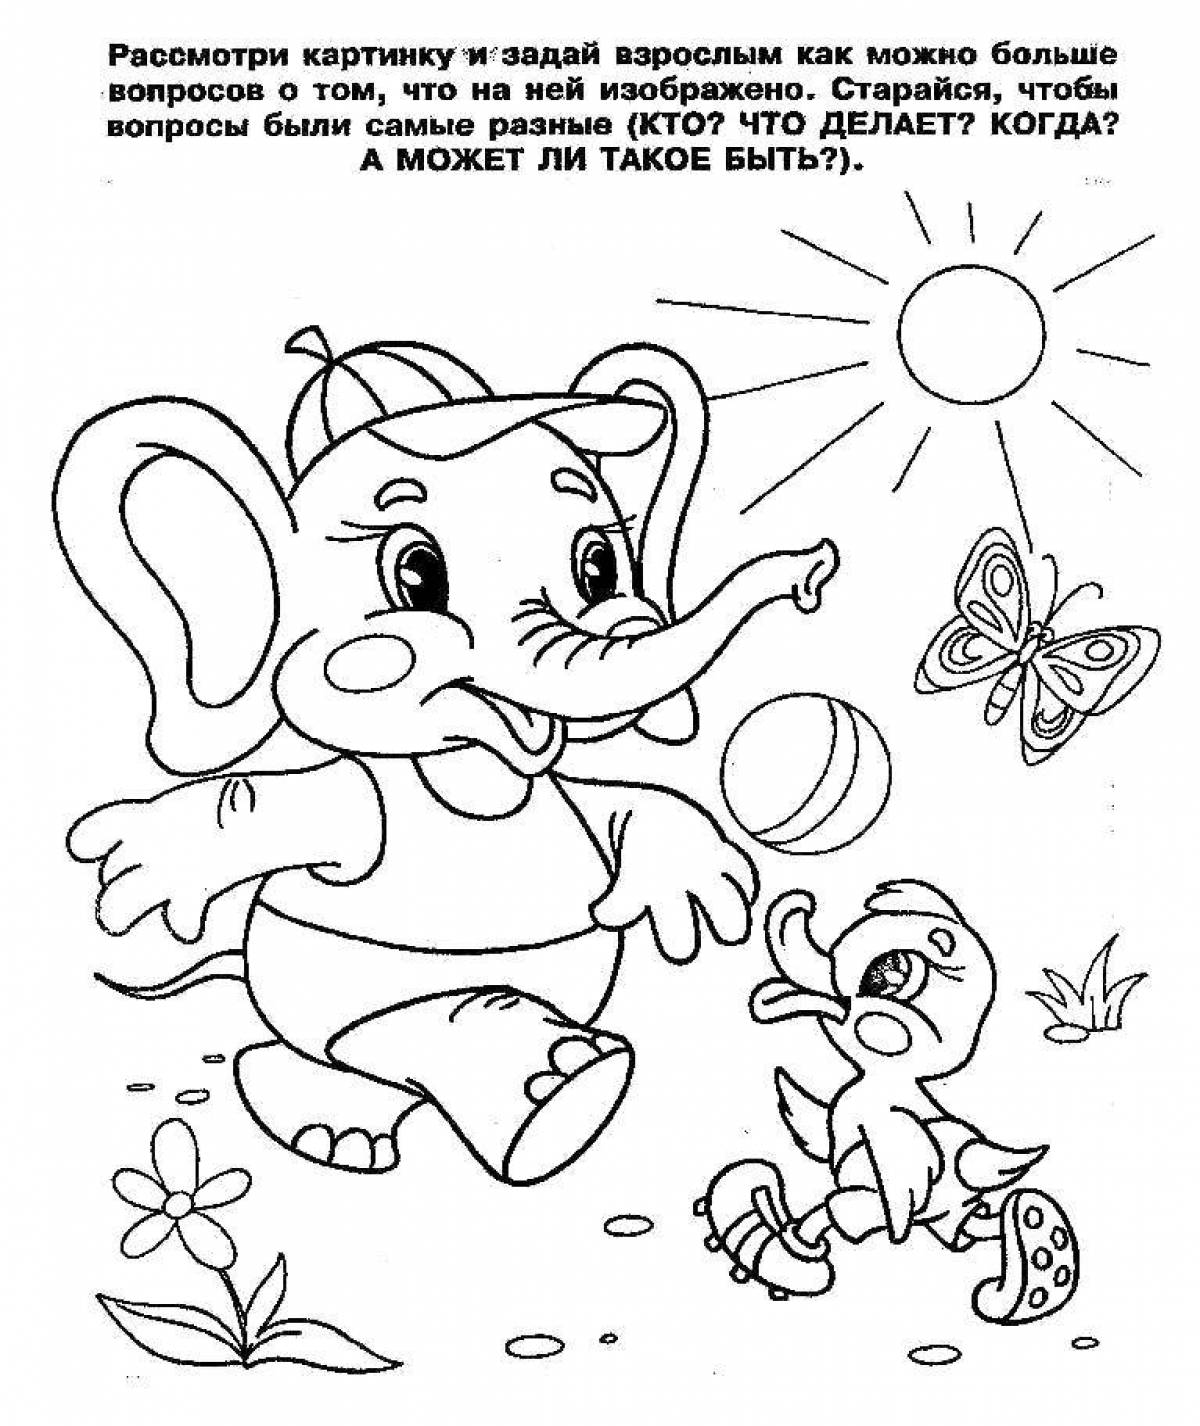 Delightful coloring book for children 5 years old